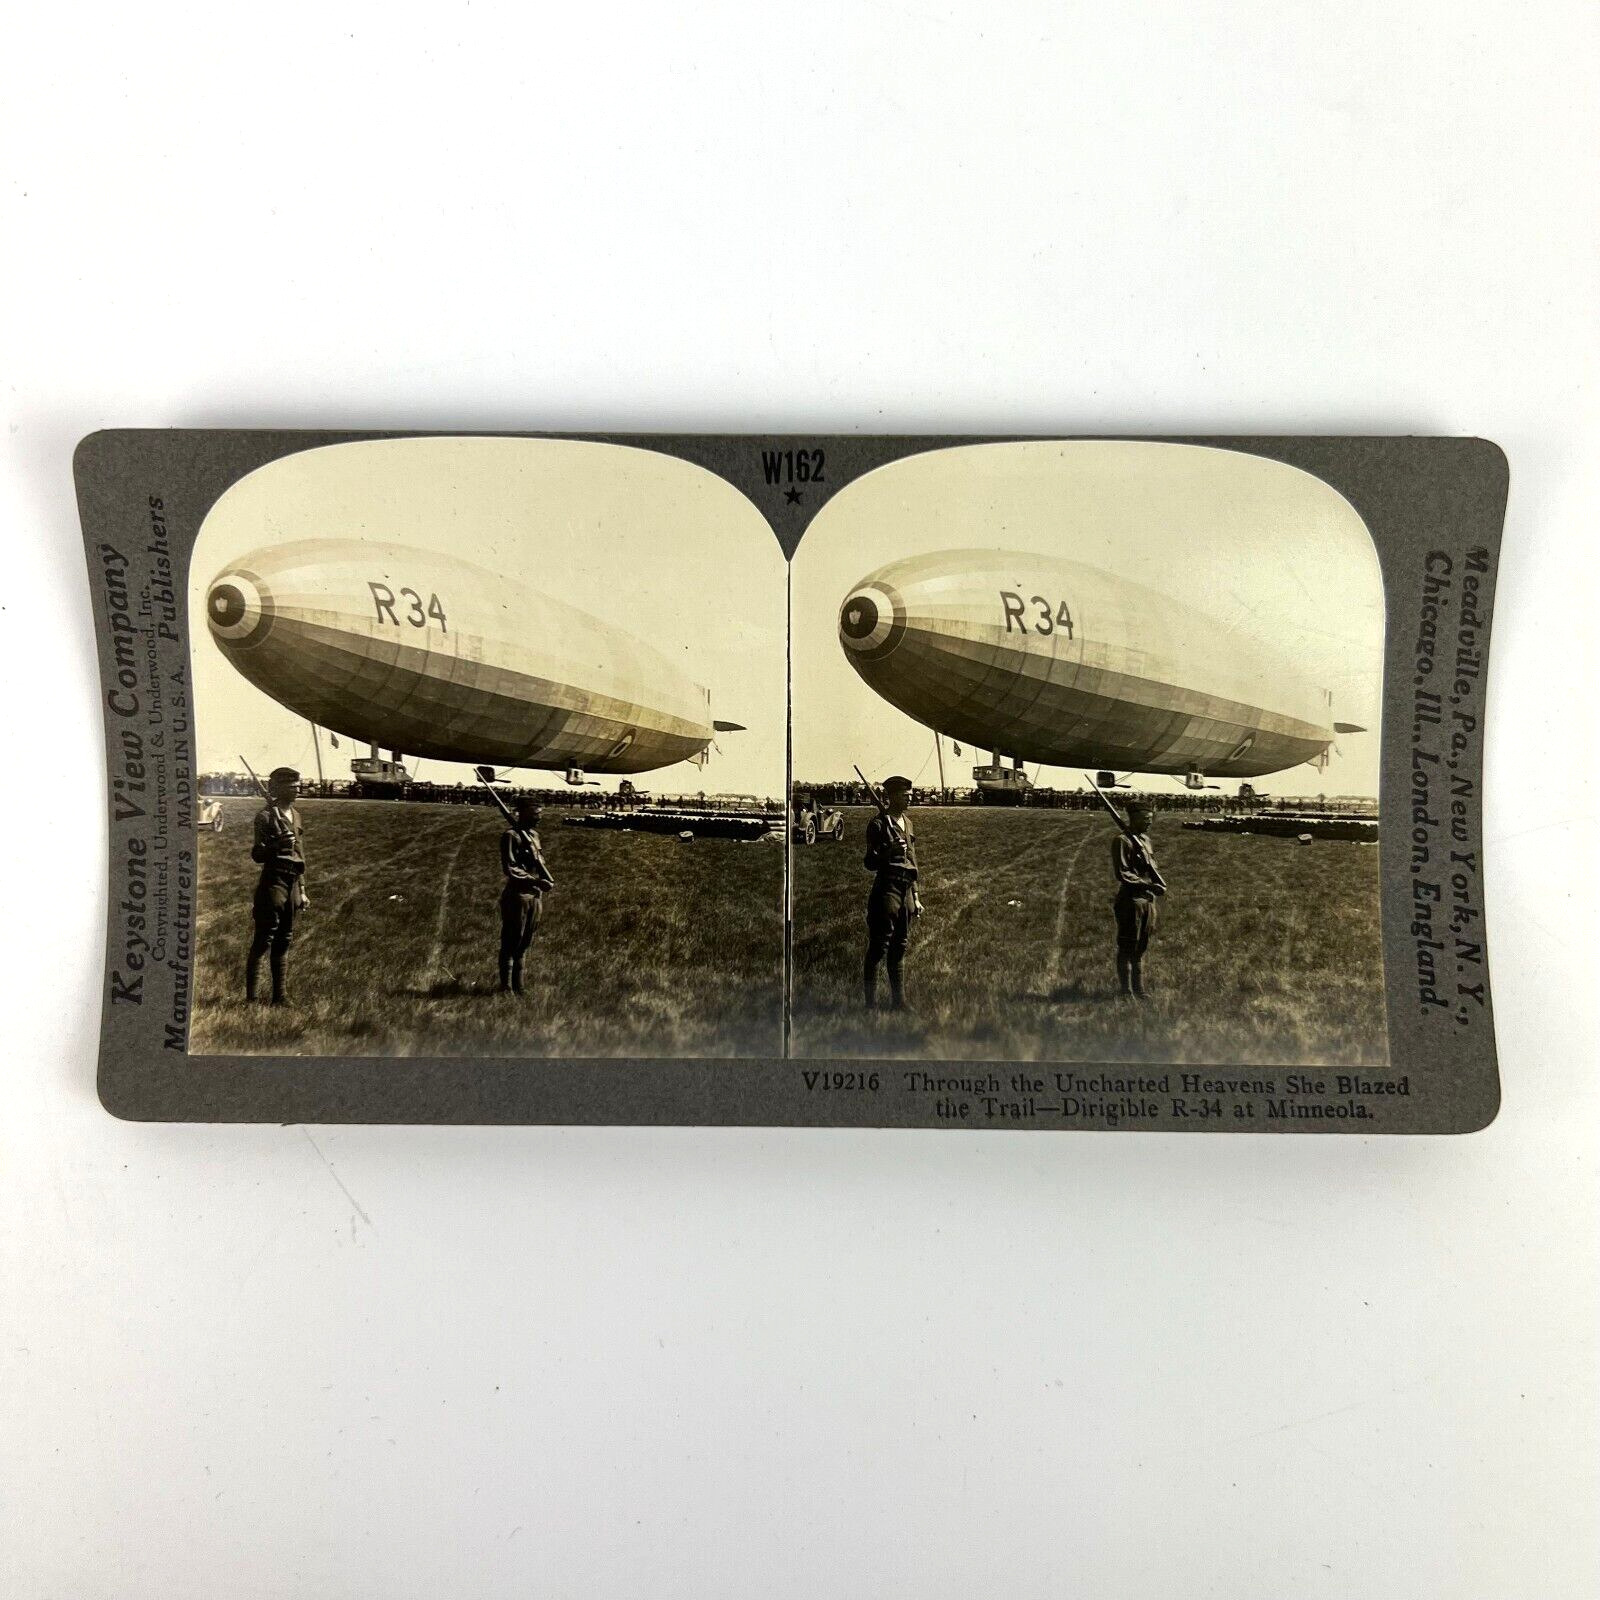 Antique WWI Photos Keystone View Co Stereograph Dirigible R-34 Minneola V19216